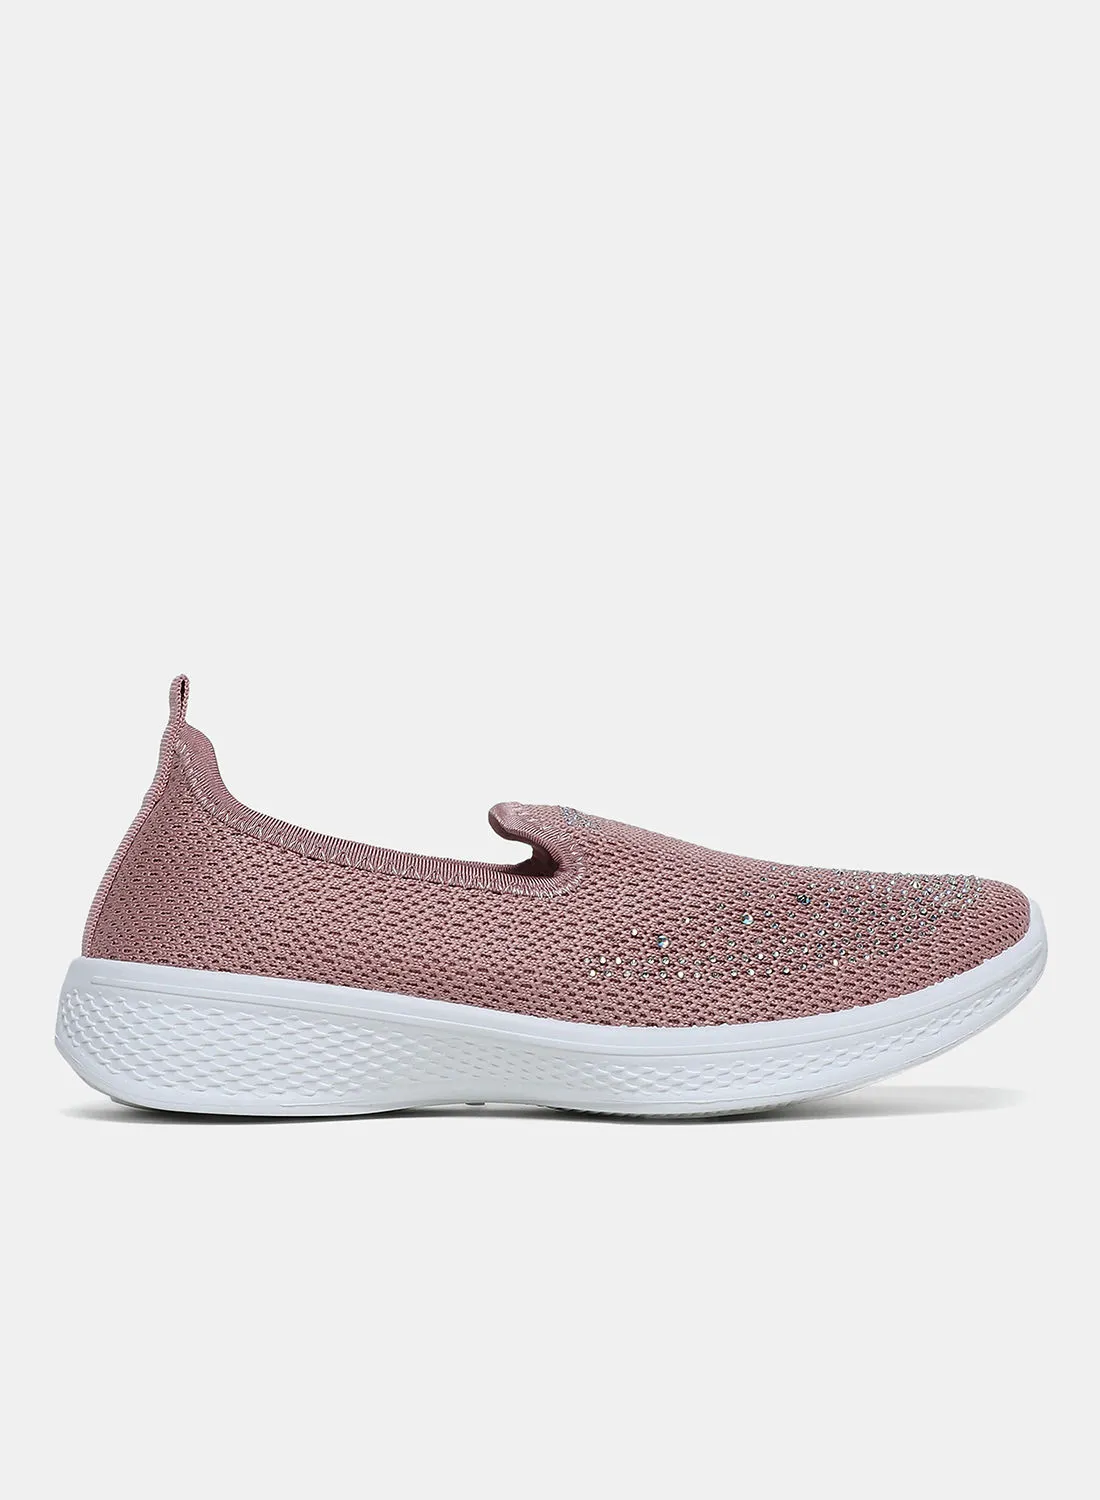 Athletiq Casual Low Top Sneakers Light Pink